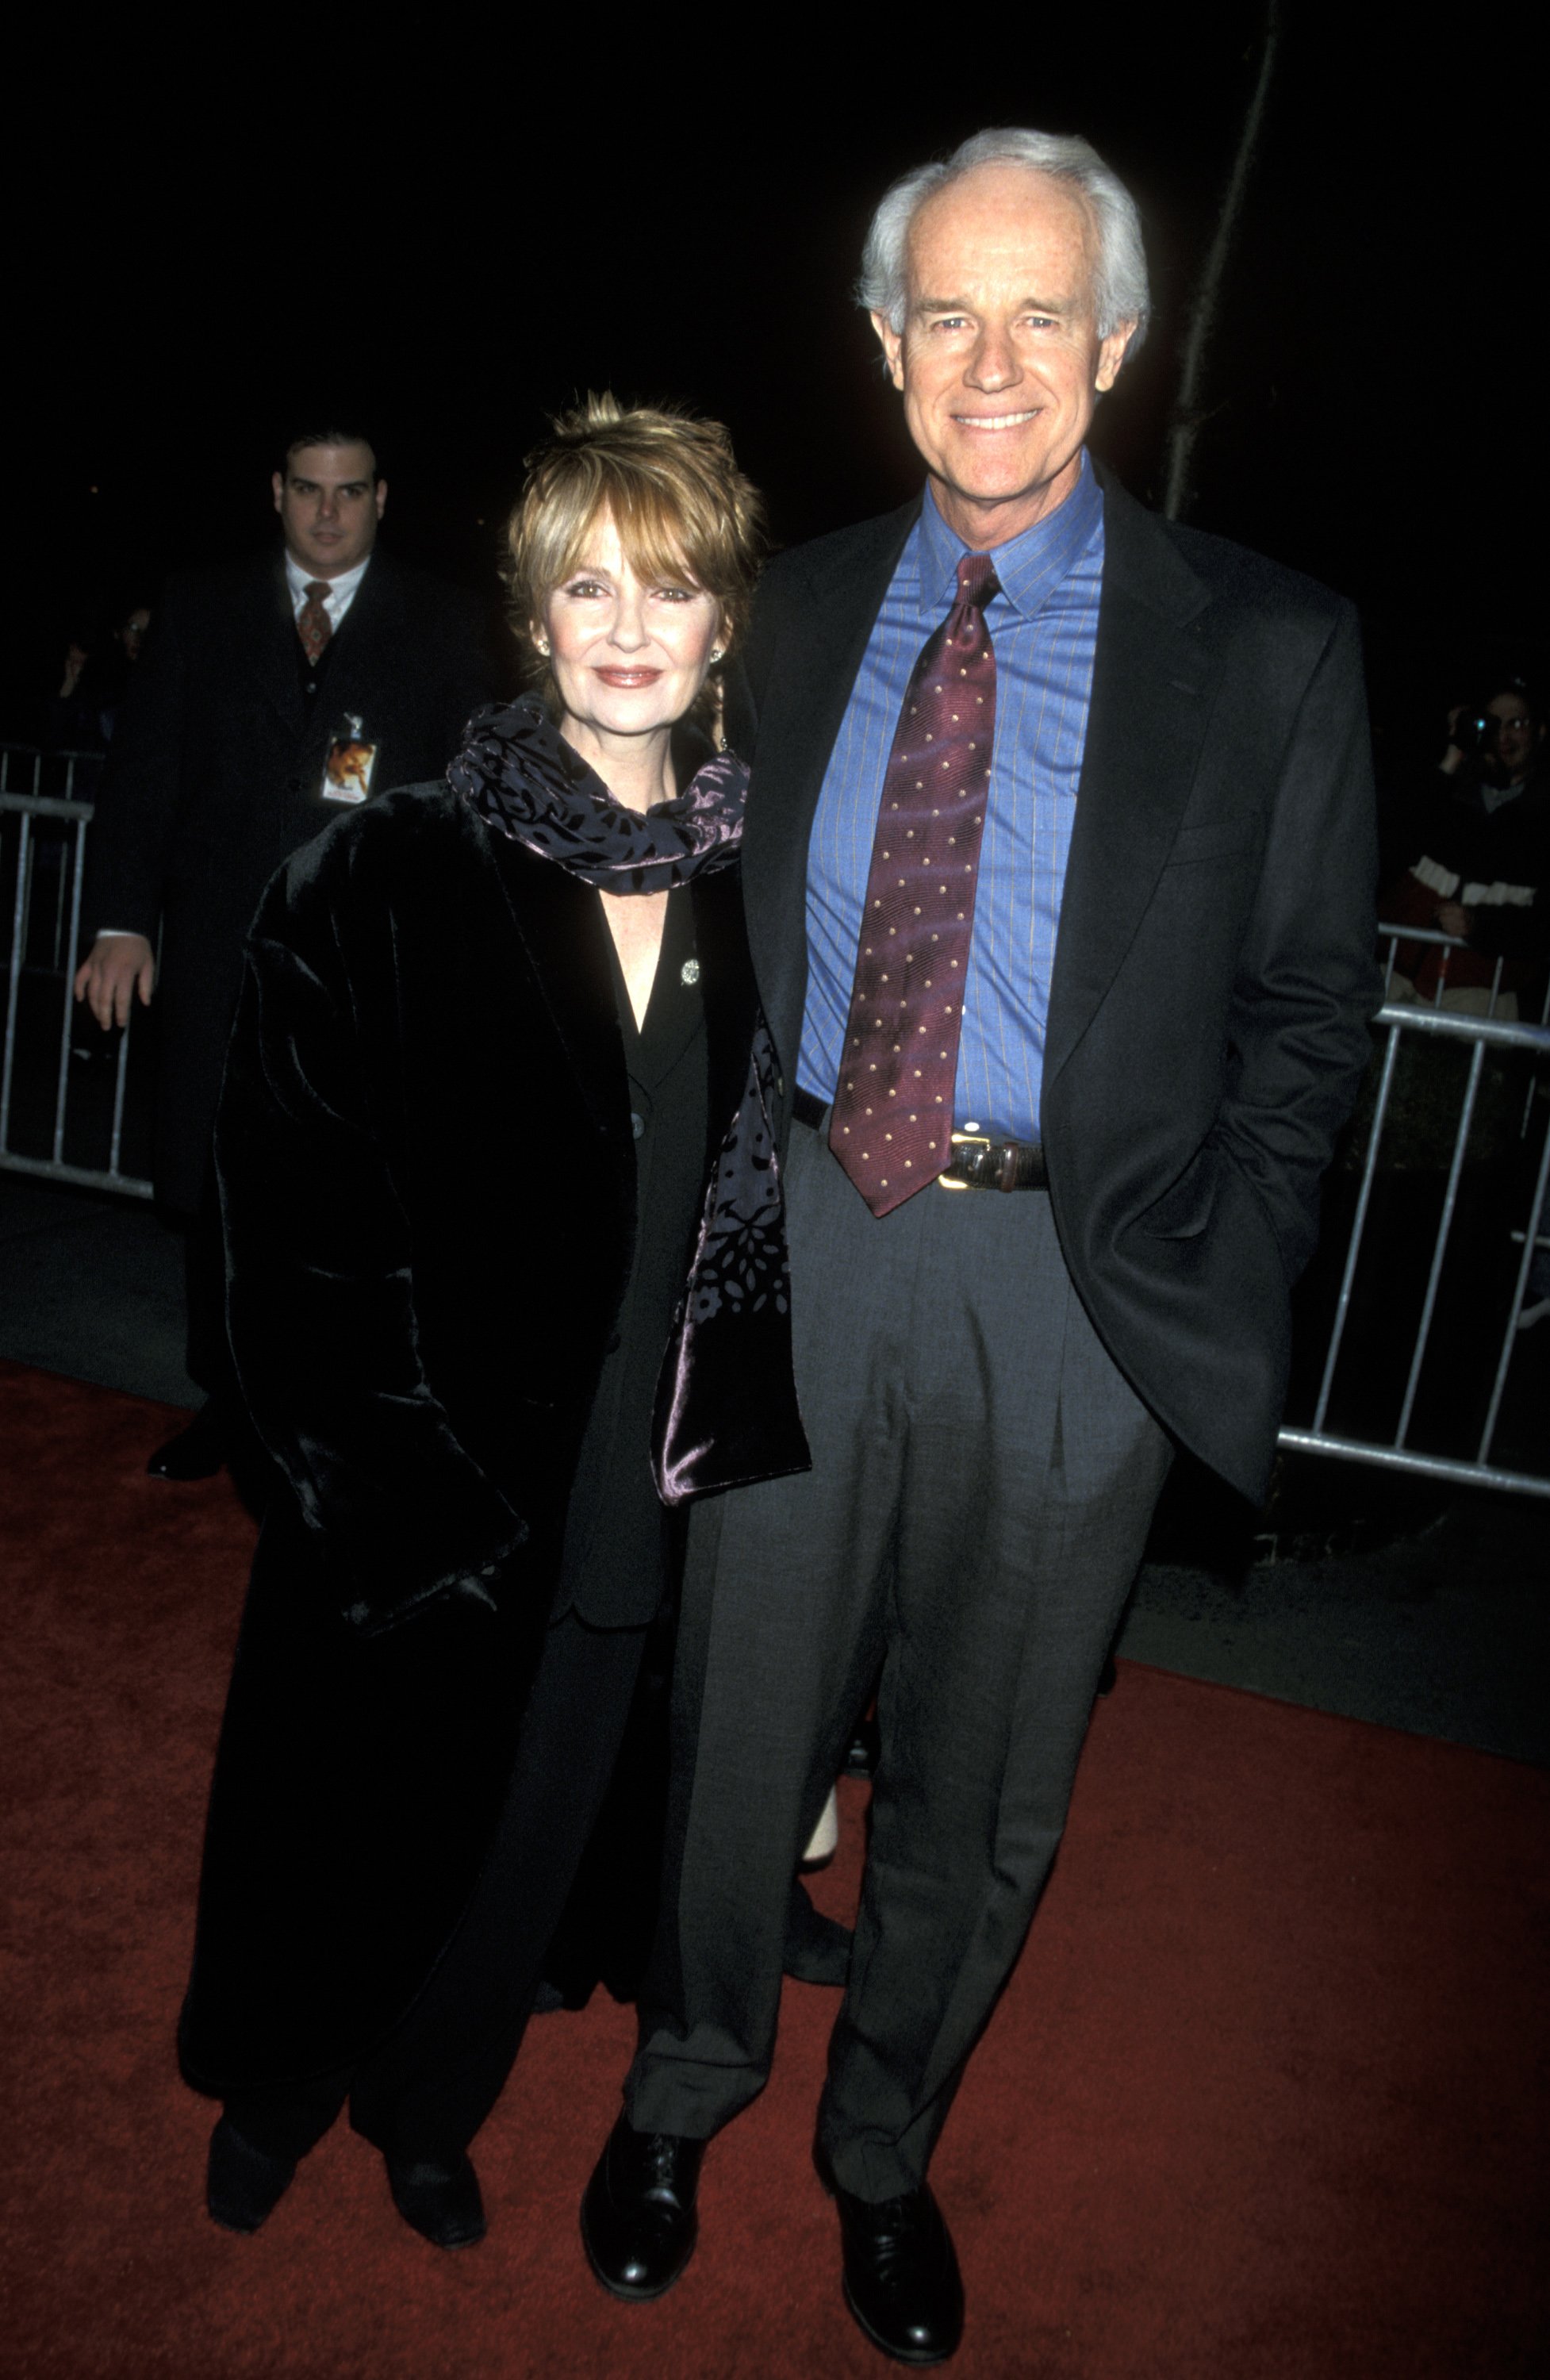 Shelley Fabares and Mike Farrell attend the "Patch Adams" New York premiere at the Ziegfeld Theater on December 13, 1998 in New York City, New York ┃Source: Getty Images